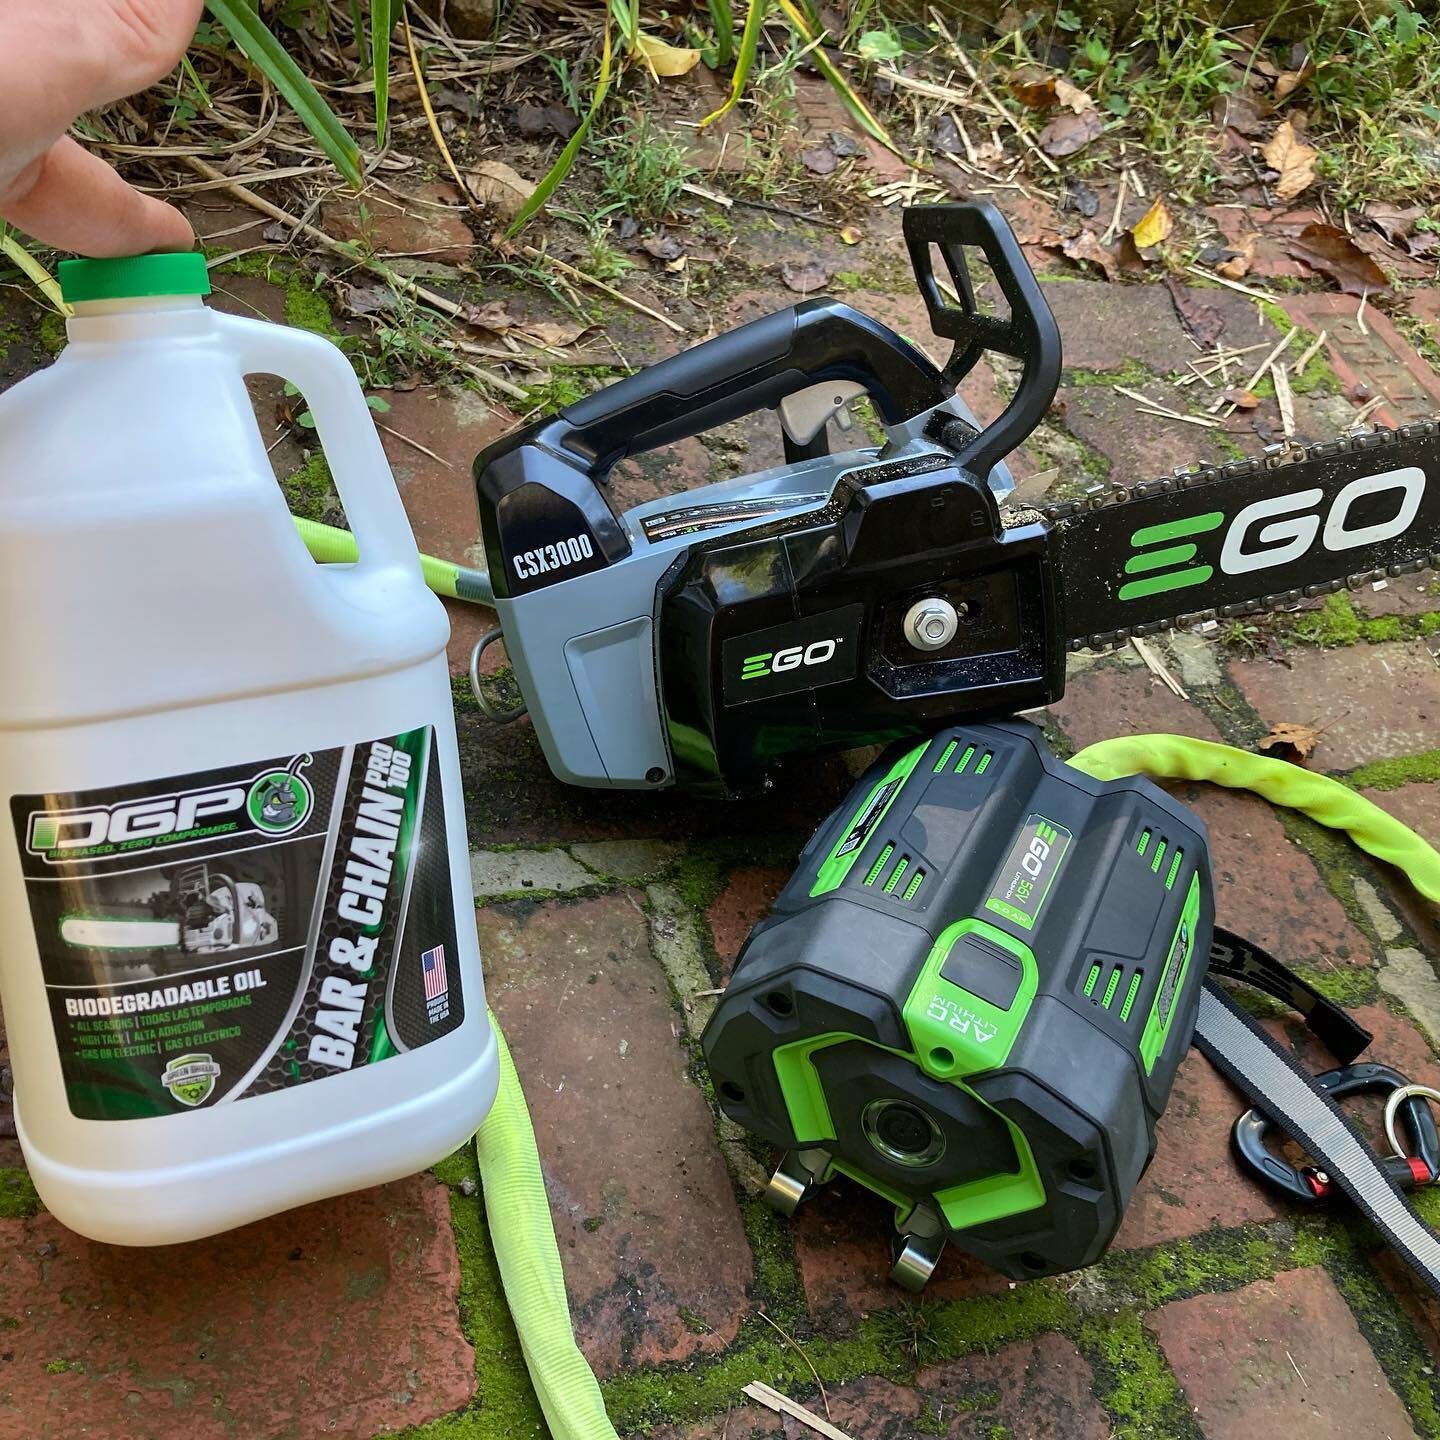 Not perfect and NOT a paid promotion. Sharing for anyone doing research on &ldquo;green&rdquo; options. This is the bar oil I use (100% bio, USA made), and this EGO CSX3000 is the first electric saw that comes close to a professional limbing/climbing